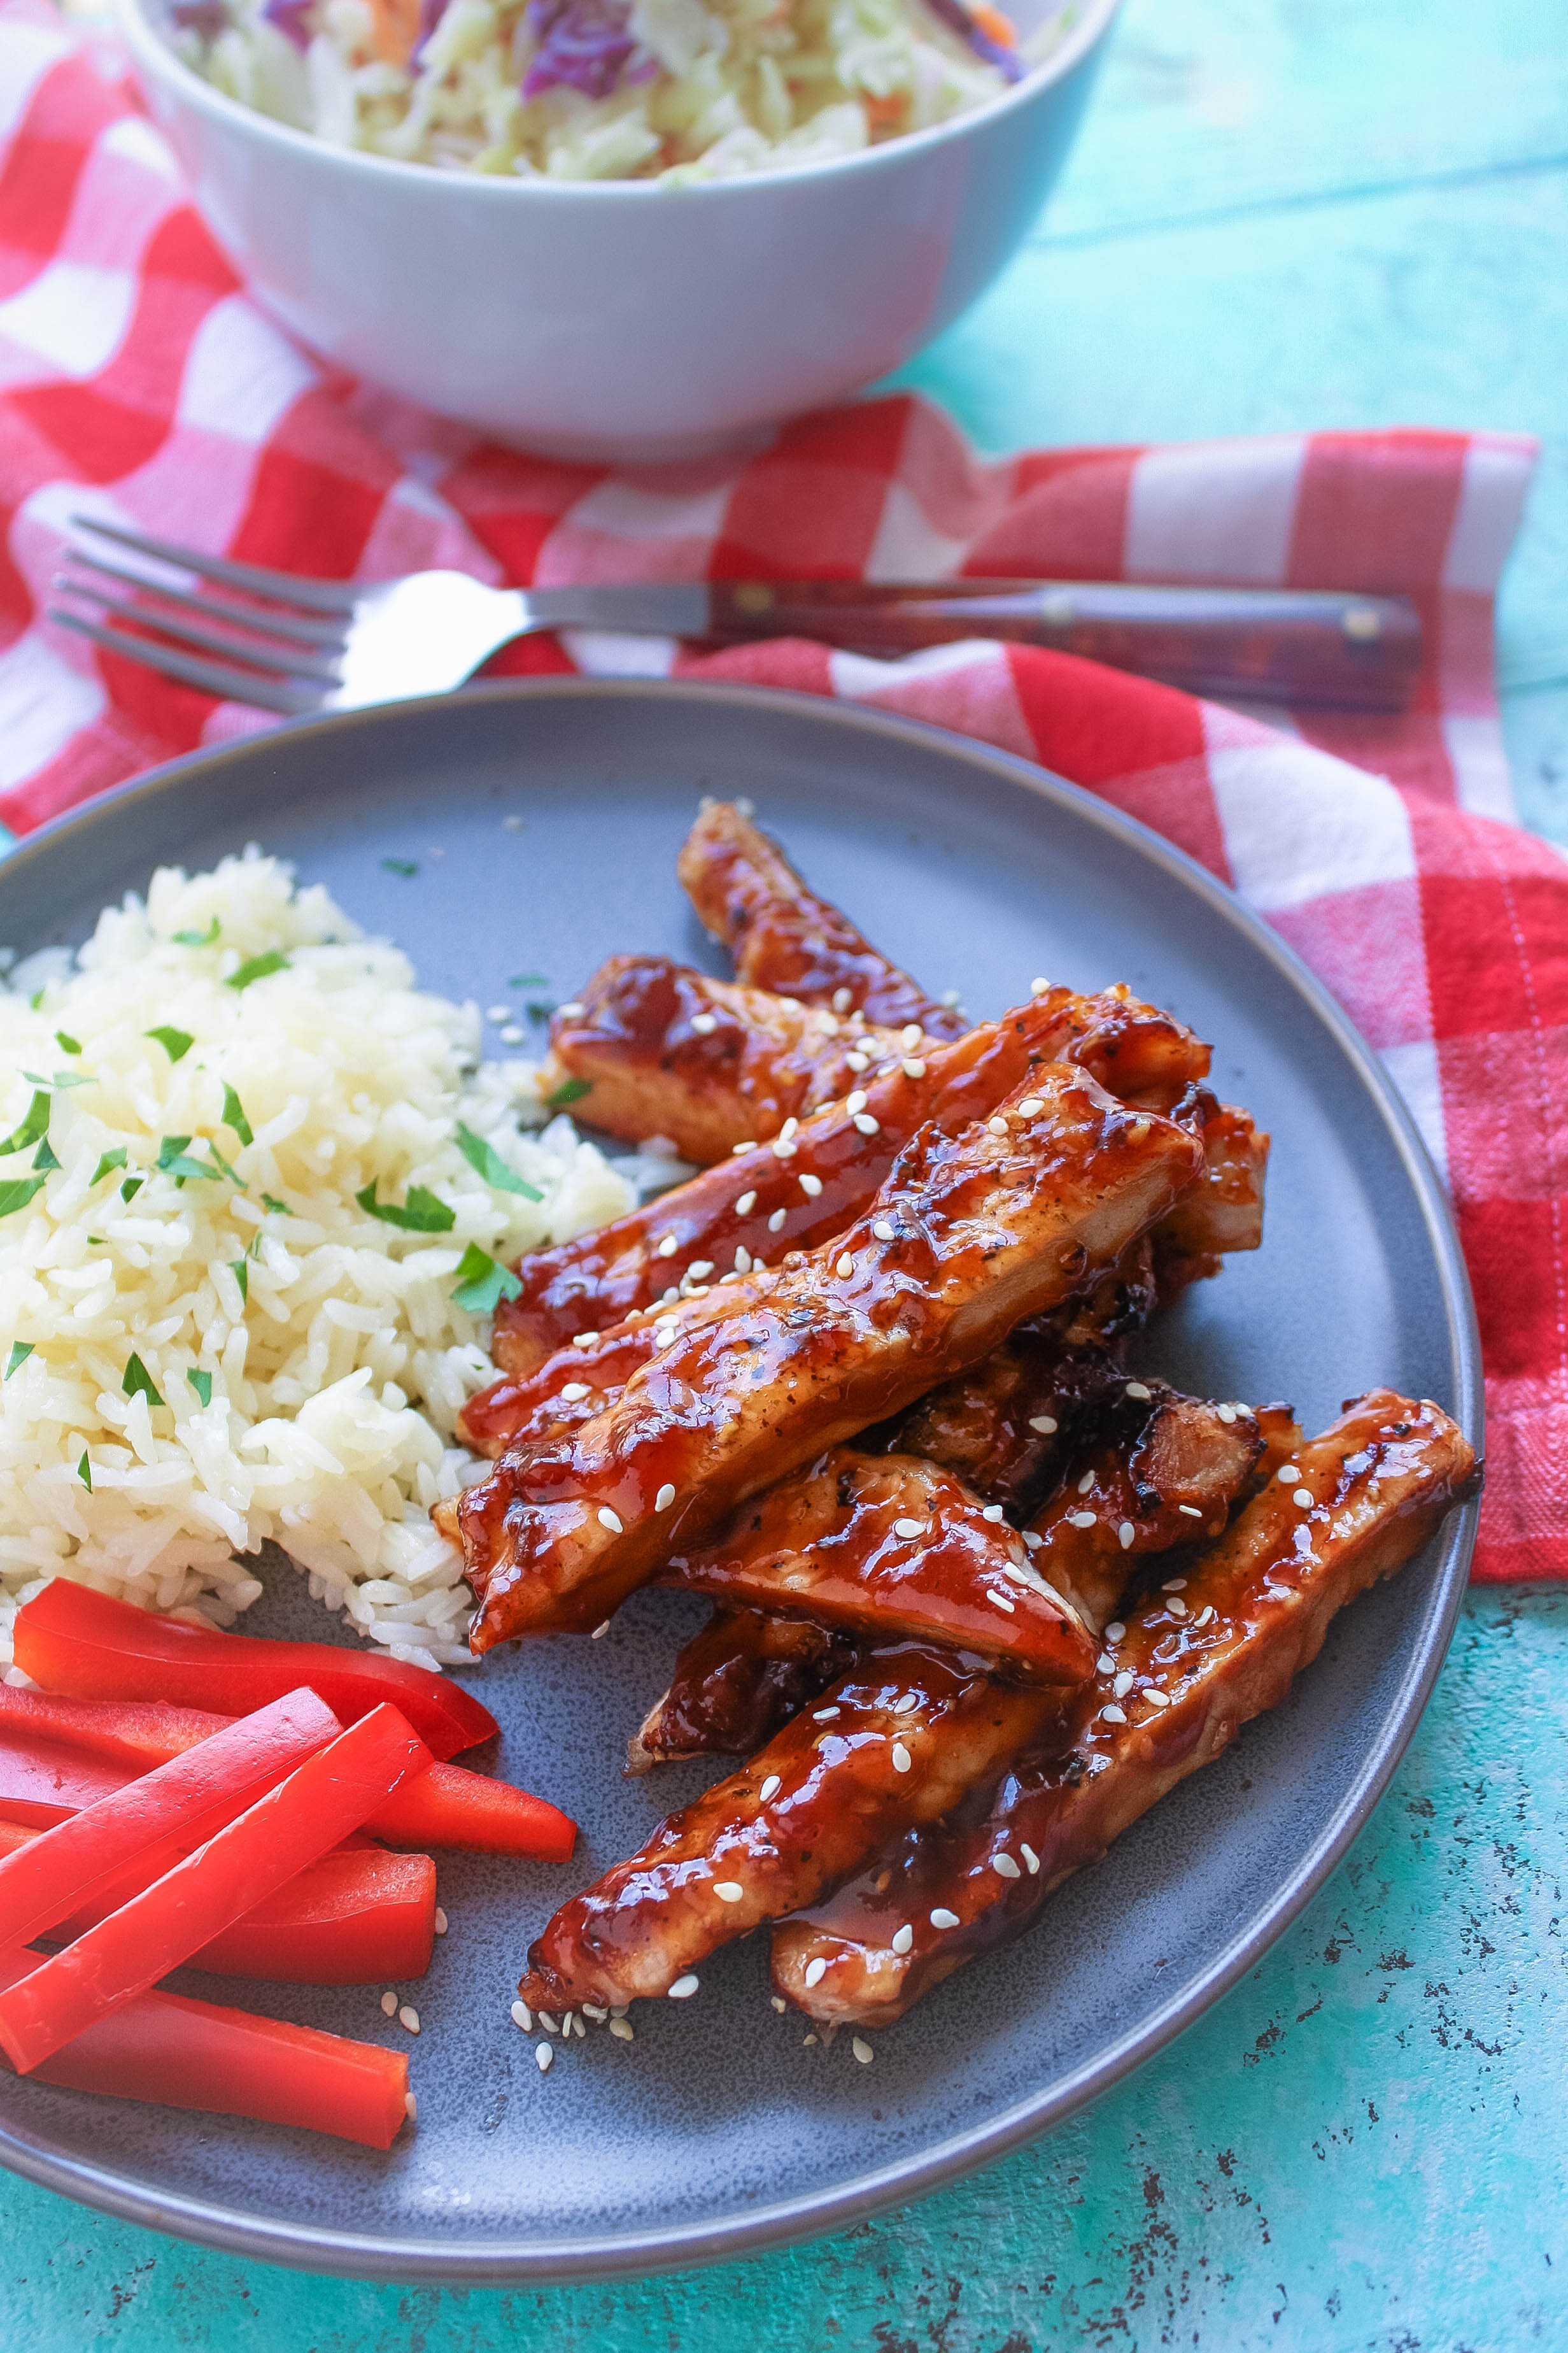 Grilled Pork with Korean-Style BBQ Sauce is a delight for a main dish meal. Grilled Pork with Korean-Style BBQ Sauce is so easy to make, and it's delicious, too!